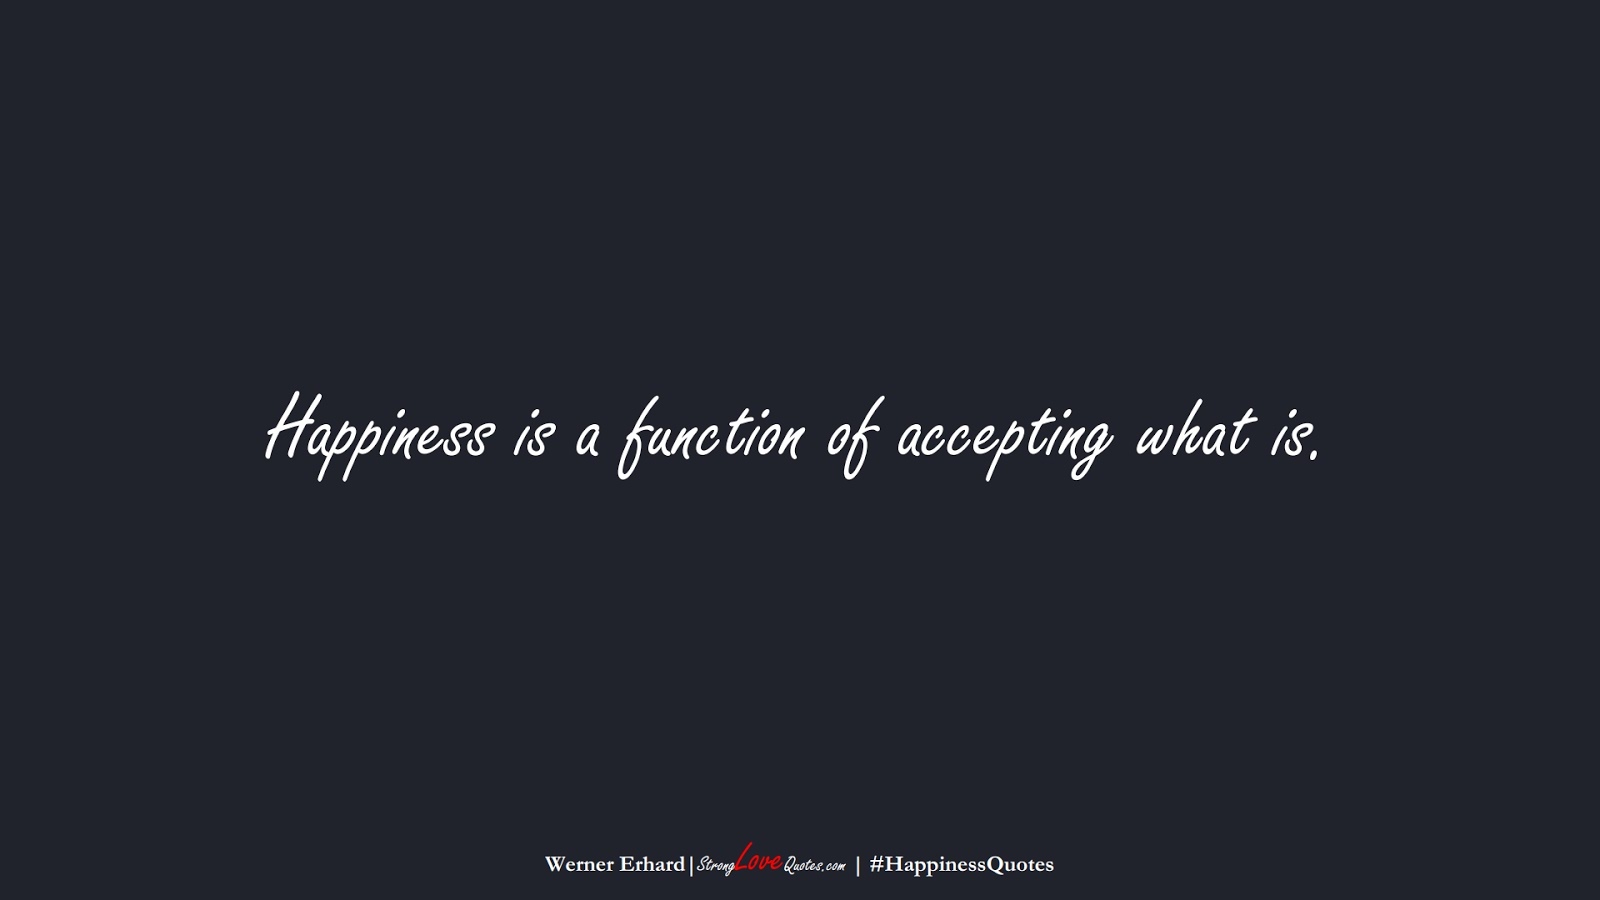 Happiness is a function of accepting what is. (Werner Erhard);  #HappinessQuotes